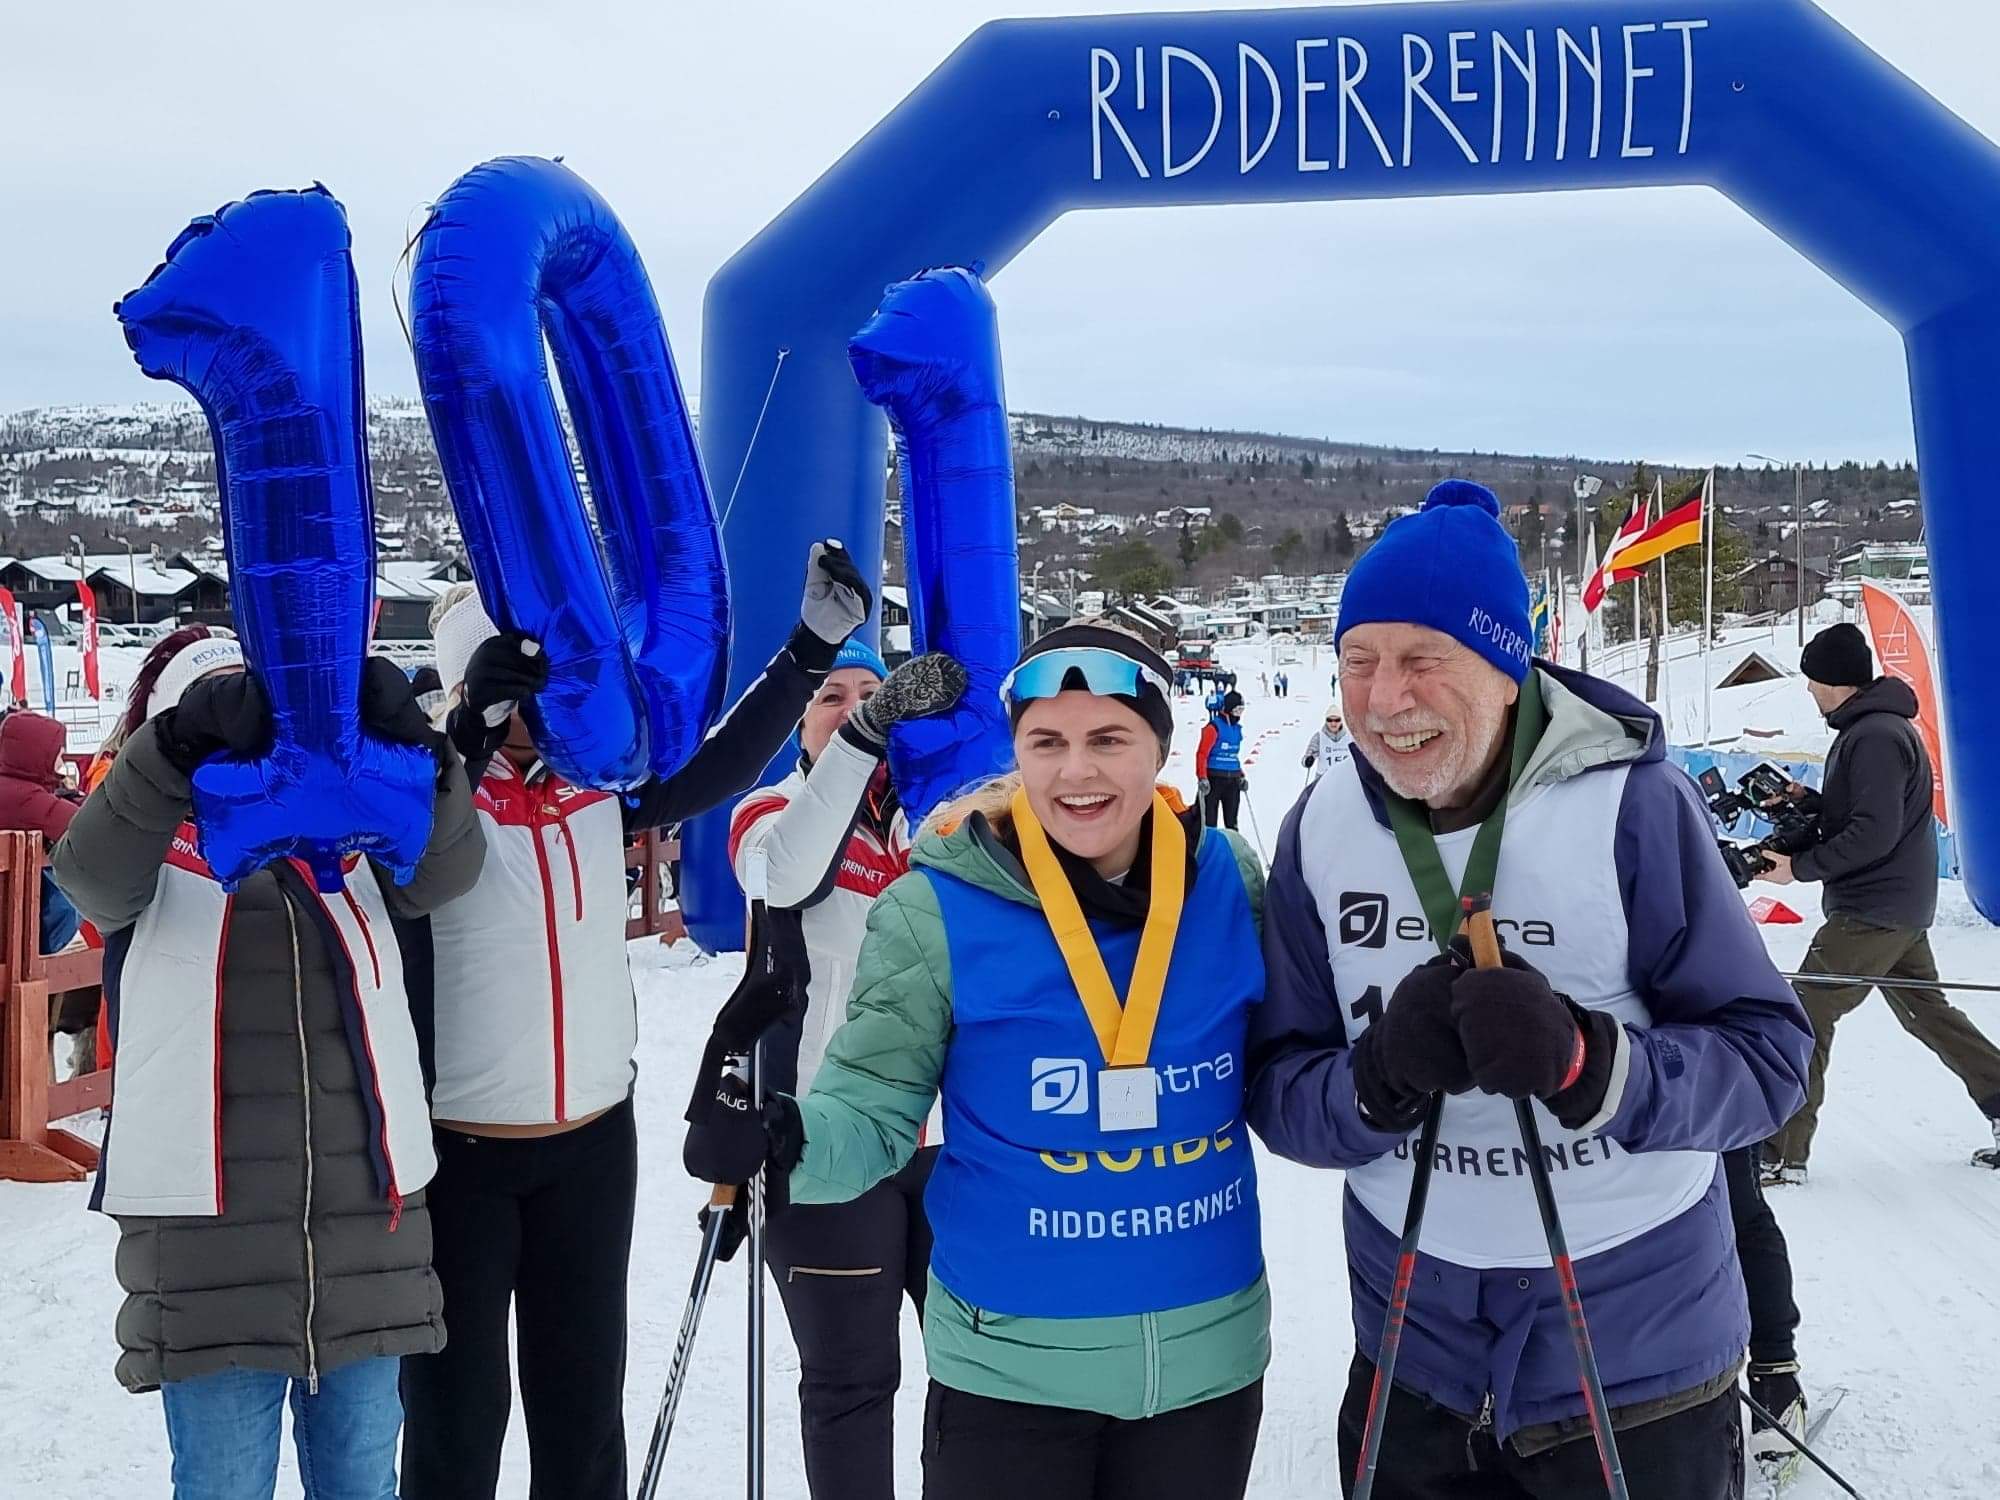 Charles Wirfts and a local ski guide participating in the March 2022 Ridderrenn in Beitostølen, Norway.